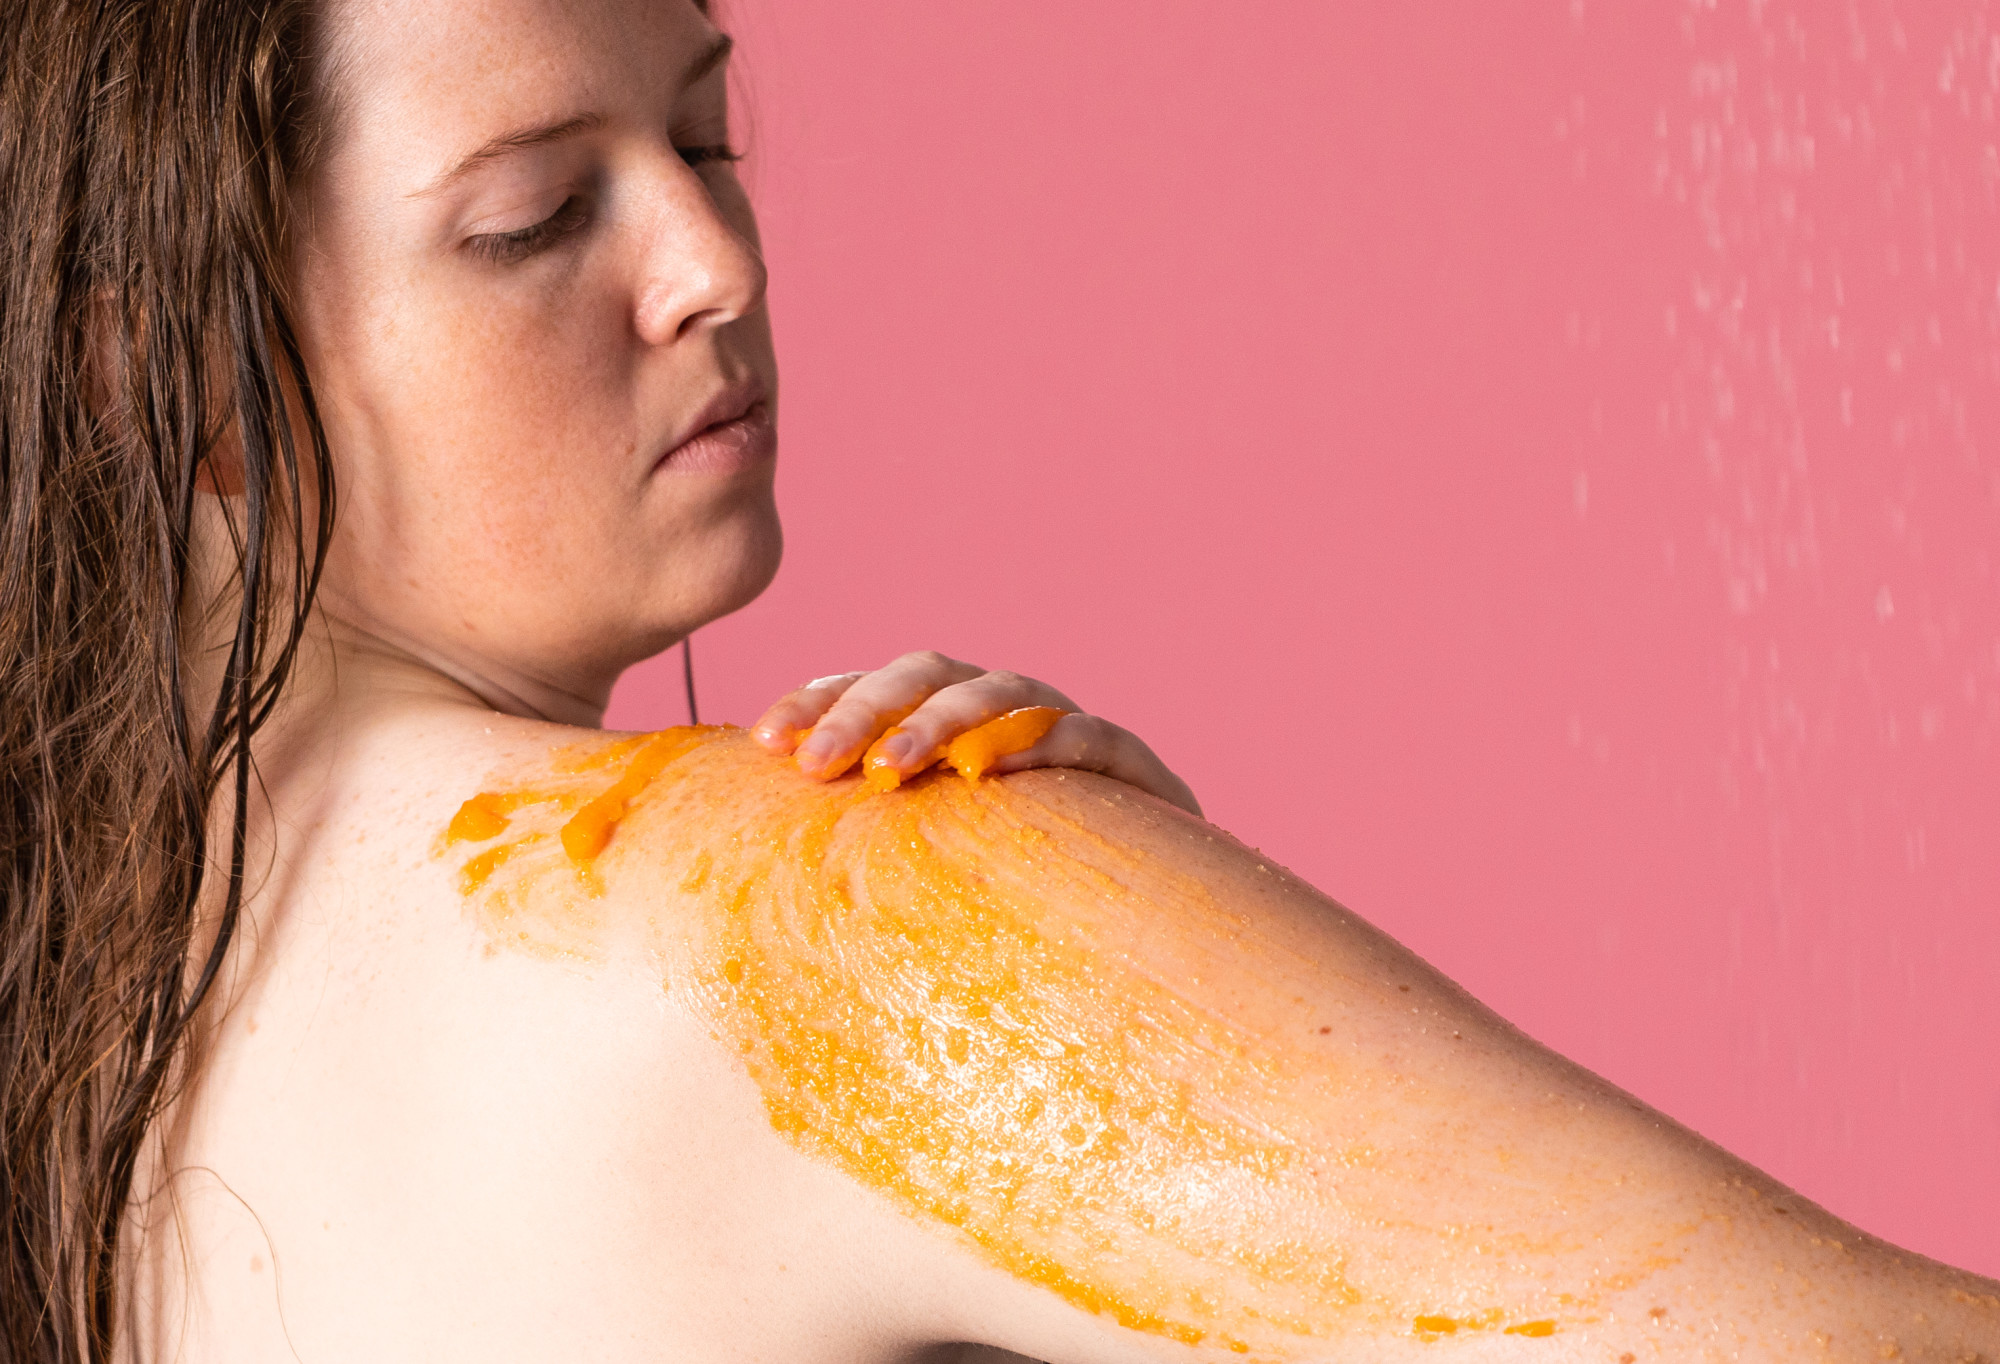 A person with long, wet hair looks down as they rub their arm, which is coated in a bright orange, sea salt body scrub.